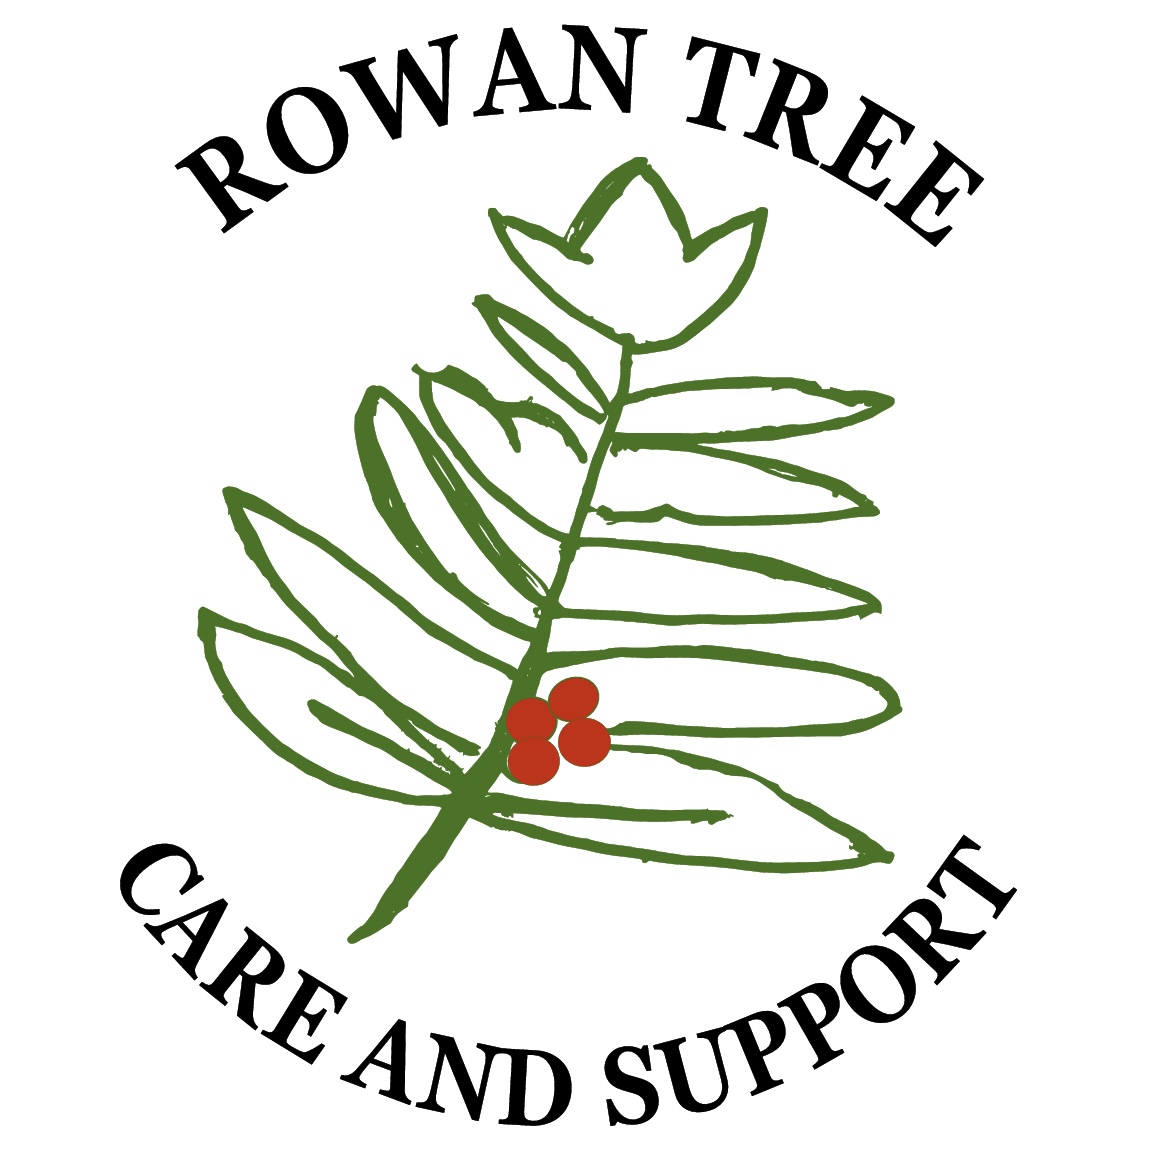 My daughter drew a rowan tree for my logo to go with the name of my business